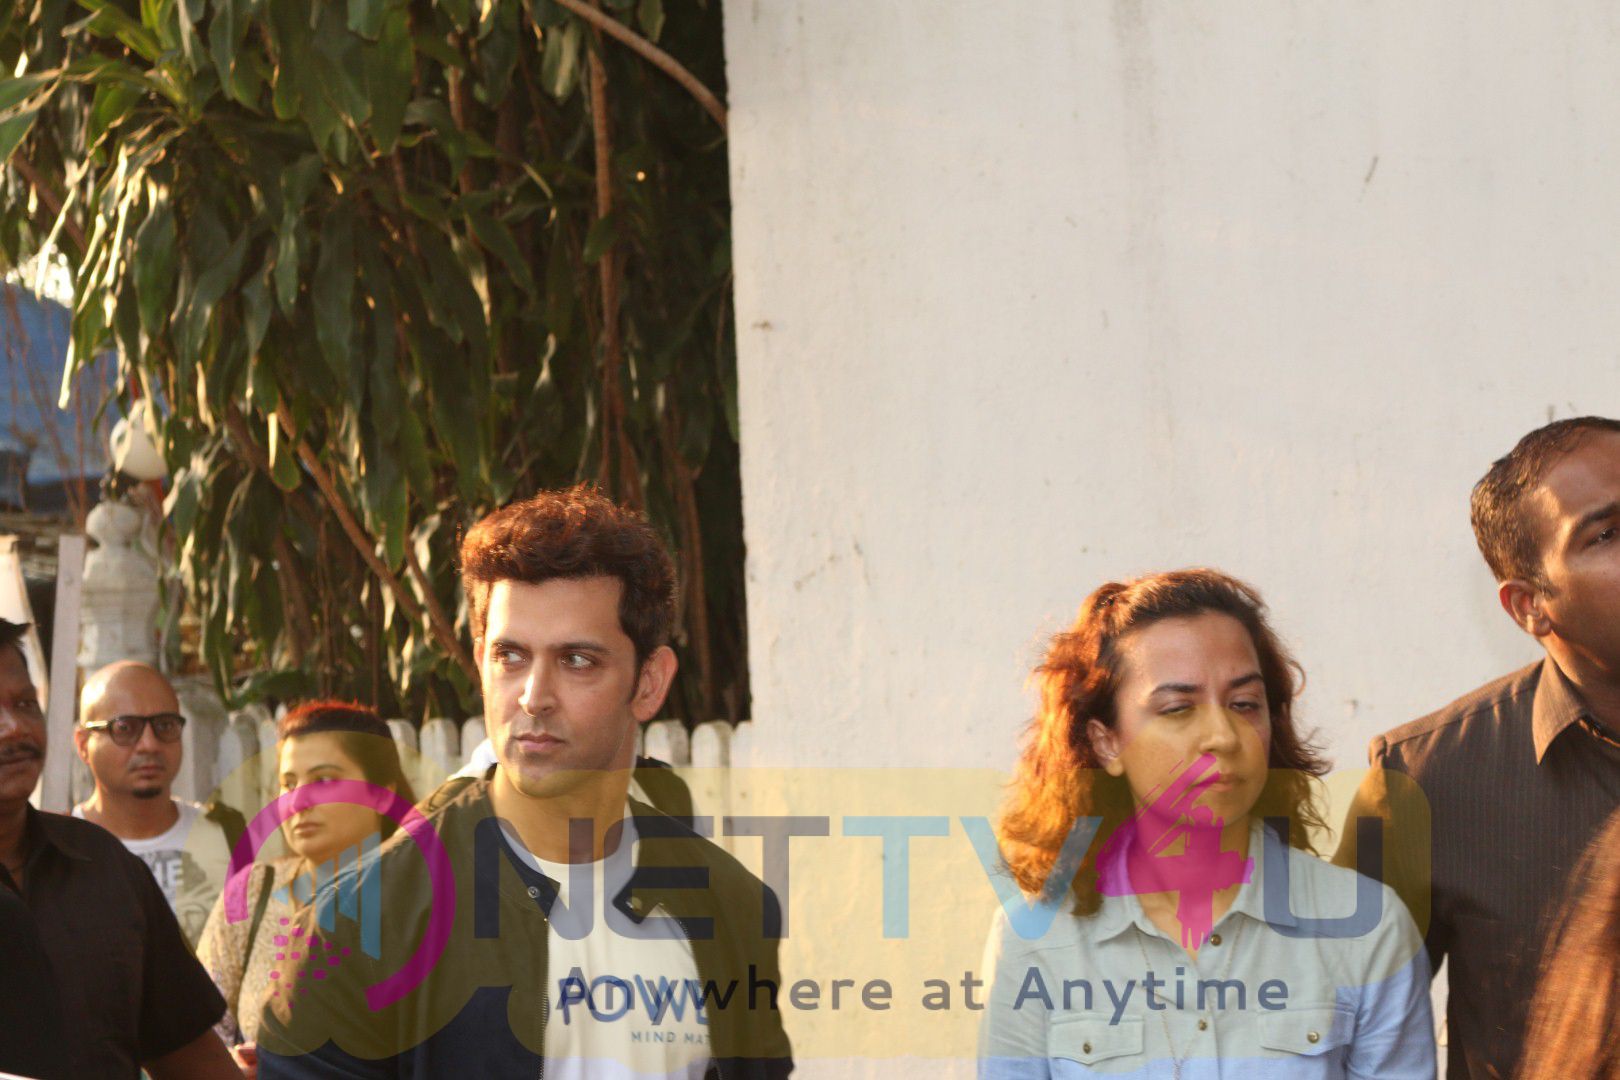 Hrithik Roshan At The Launch Of Mpower's Everyday Heroes Campaign Exclusive Photos Hindi Gallery